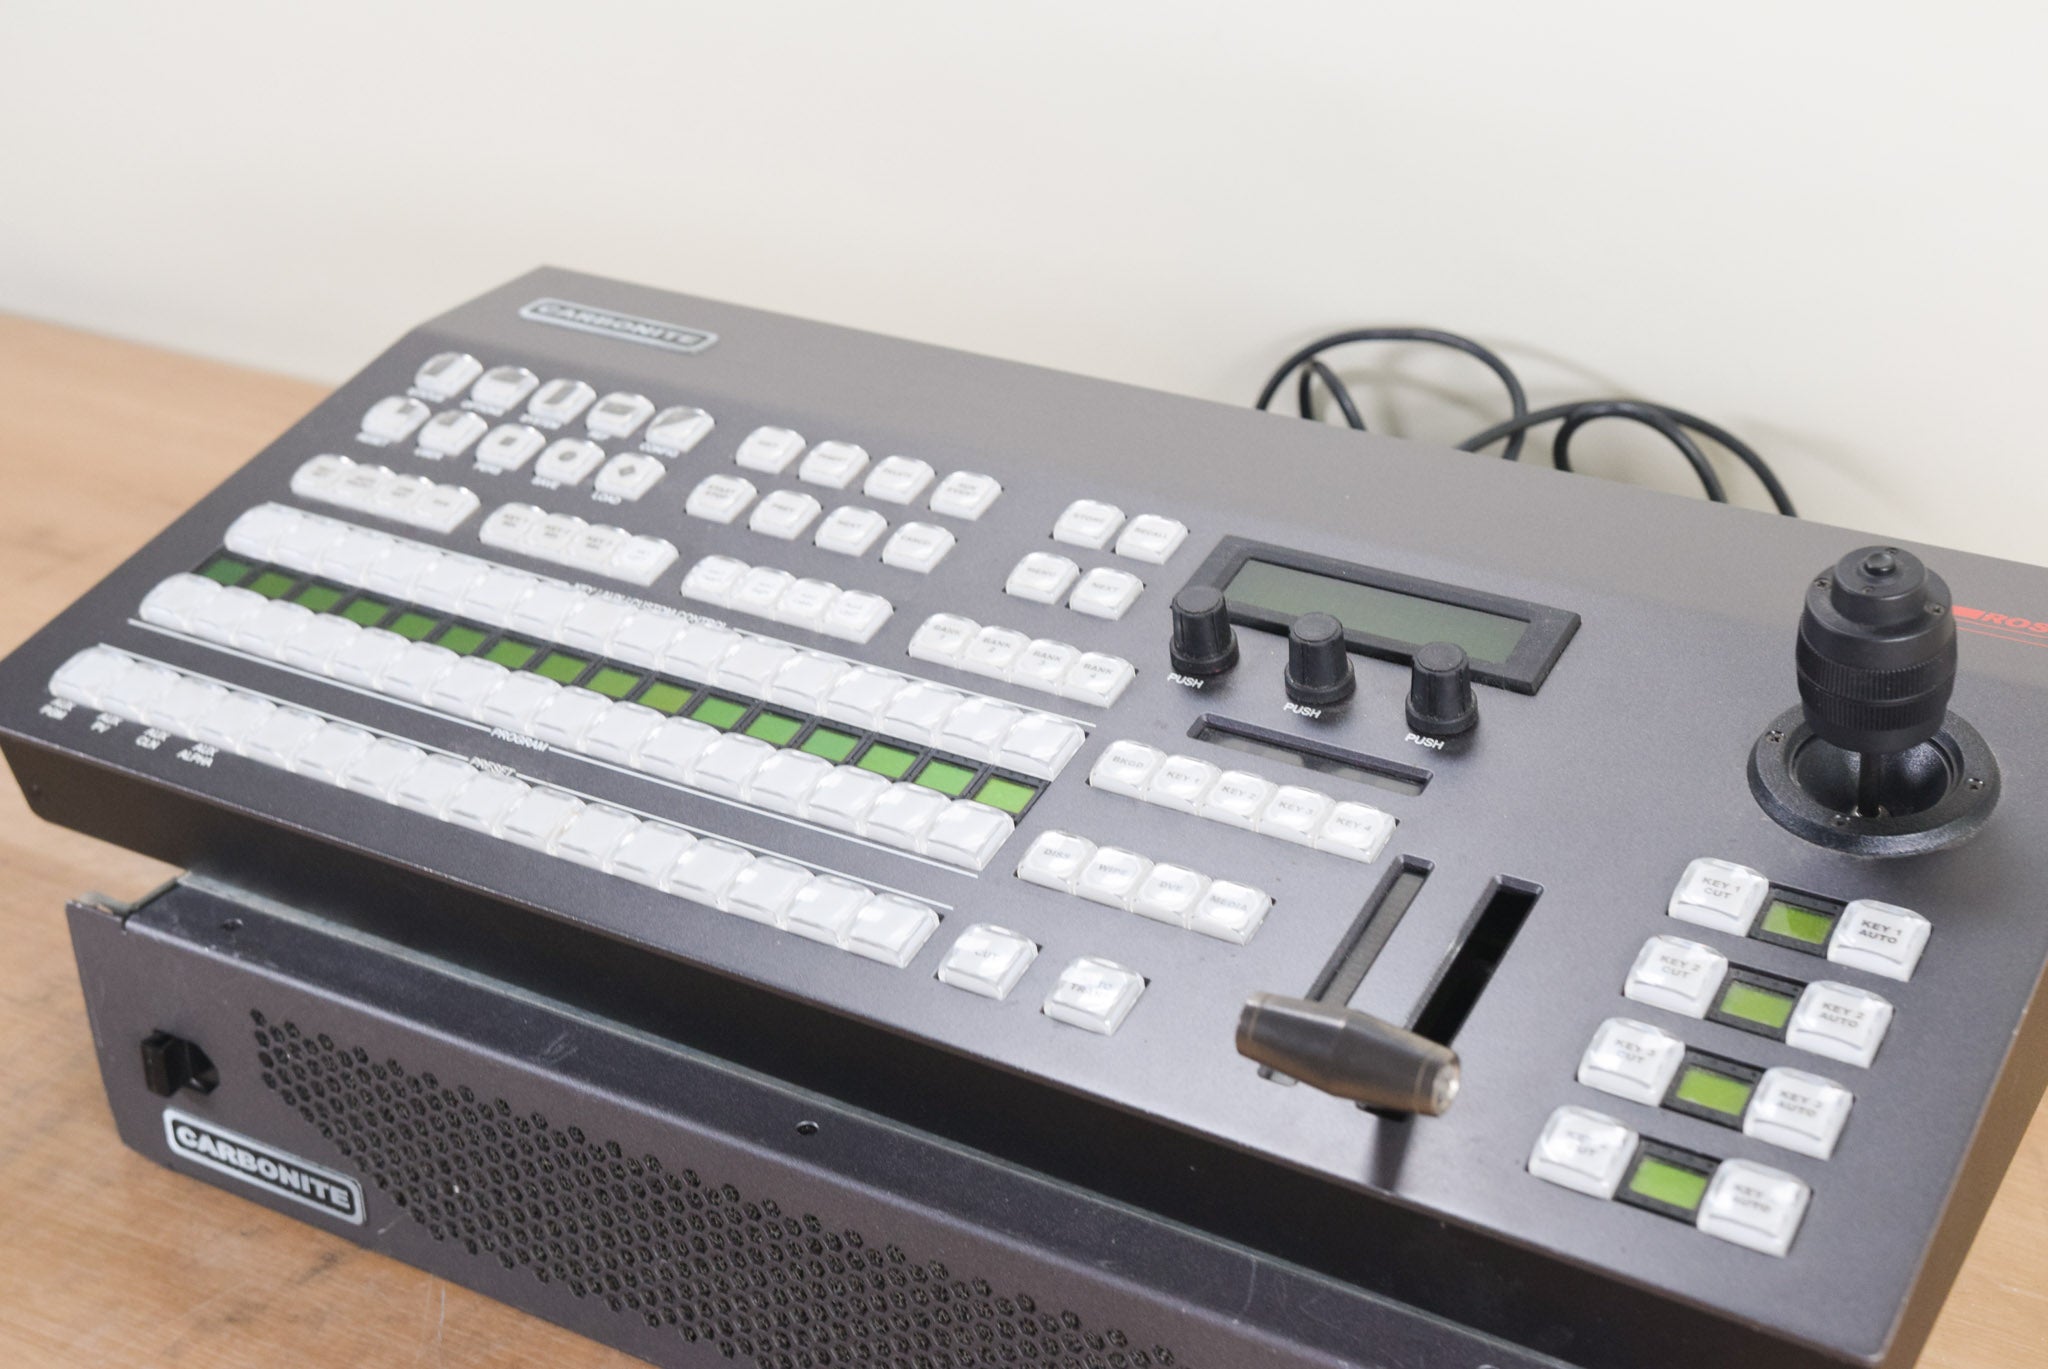 Ross Carbonite Production Switcher